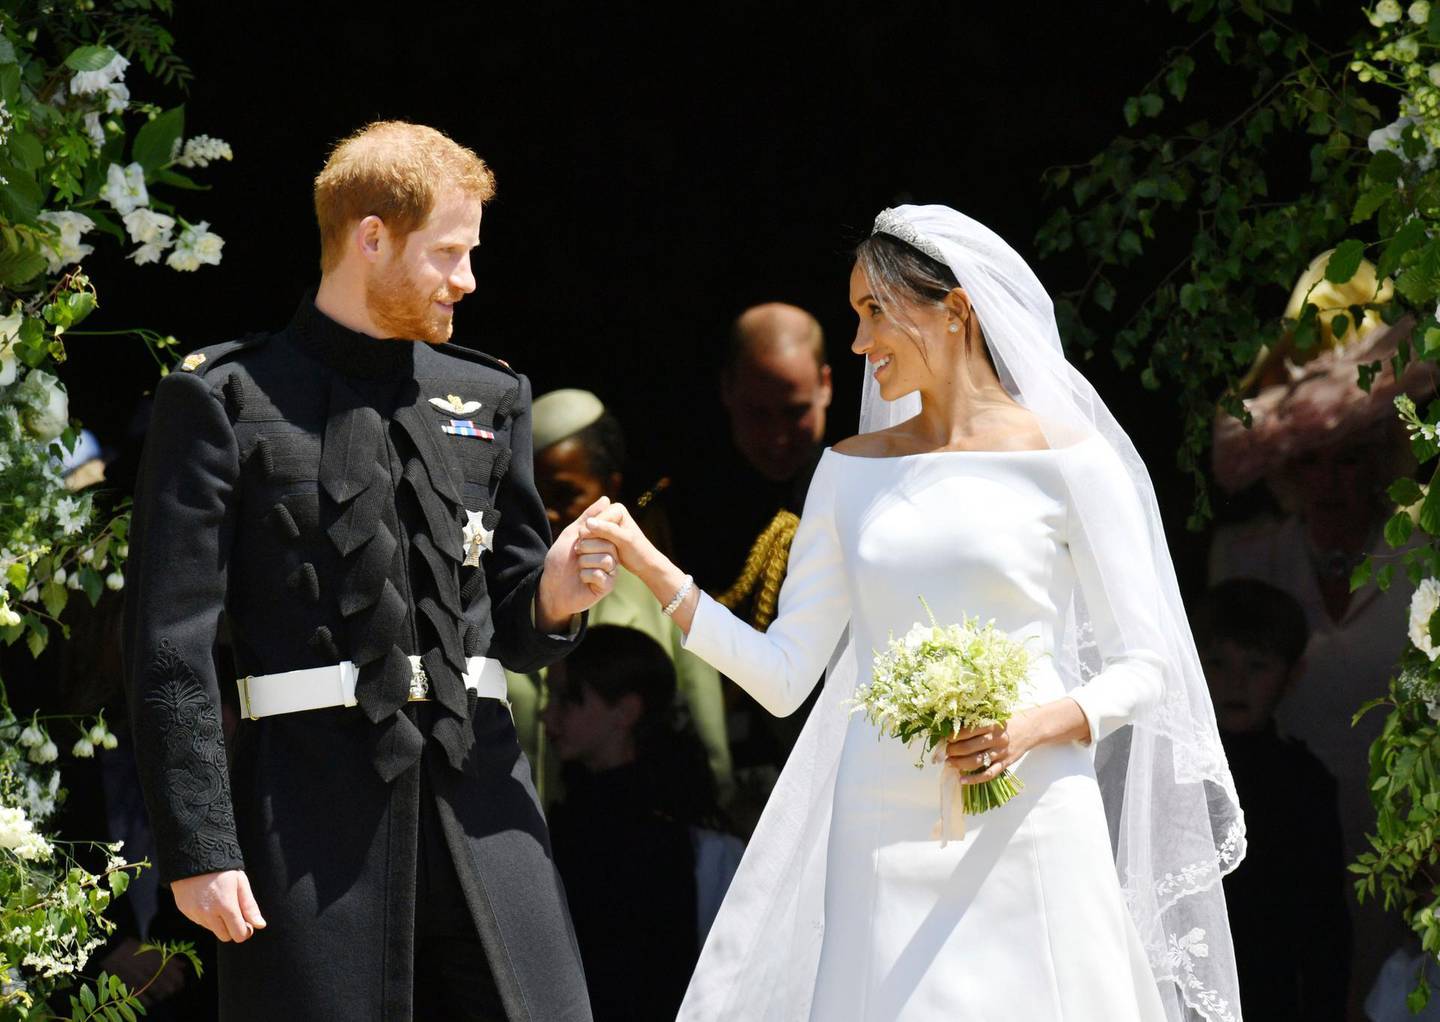 FILE - In this Saturday, May 19, 2018 file photo, Britain's Prince Harry and Meghan Markle stand on the steps of St. George's Chapel in Windsor Castle in Windsor, near London, England, after their wedding ceremony. The outfits Prince Harry and Meghan Markle wore at their wedding are to go on public display from Oct. 26, 2018 at the ceremony's venue, Windsor Castle. (Ben Birchhall/pool photo via AP, File)